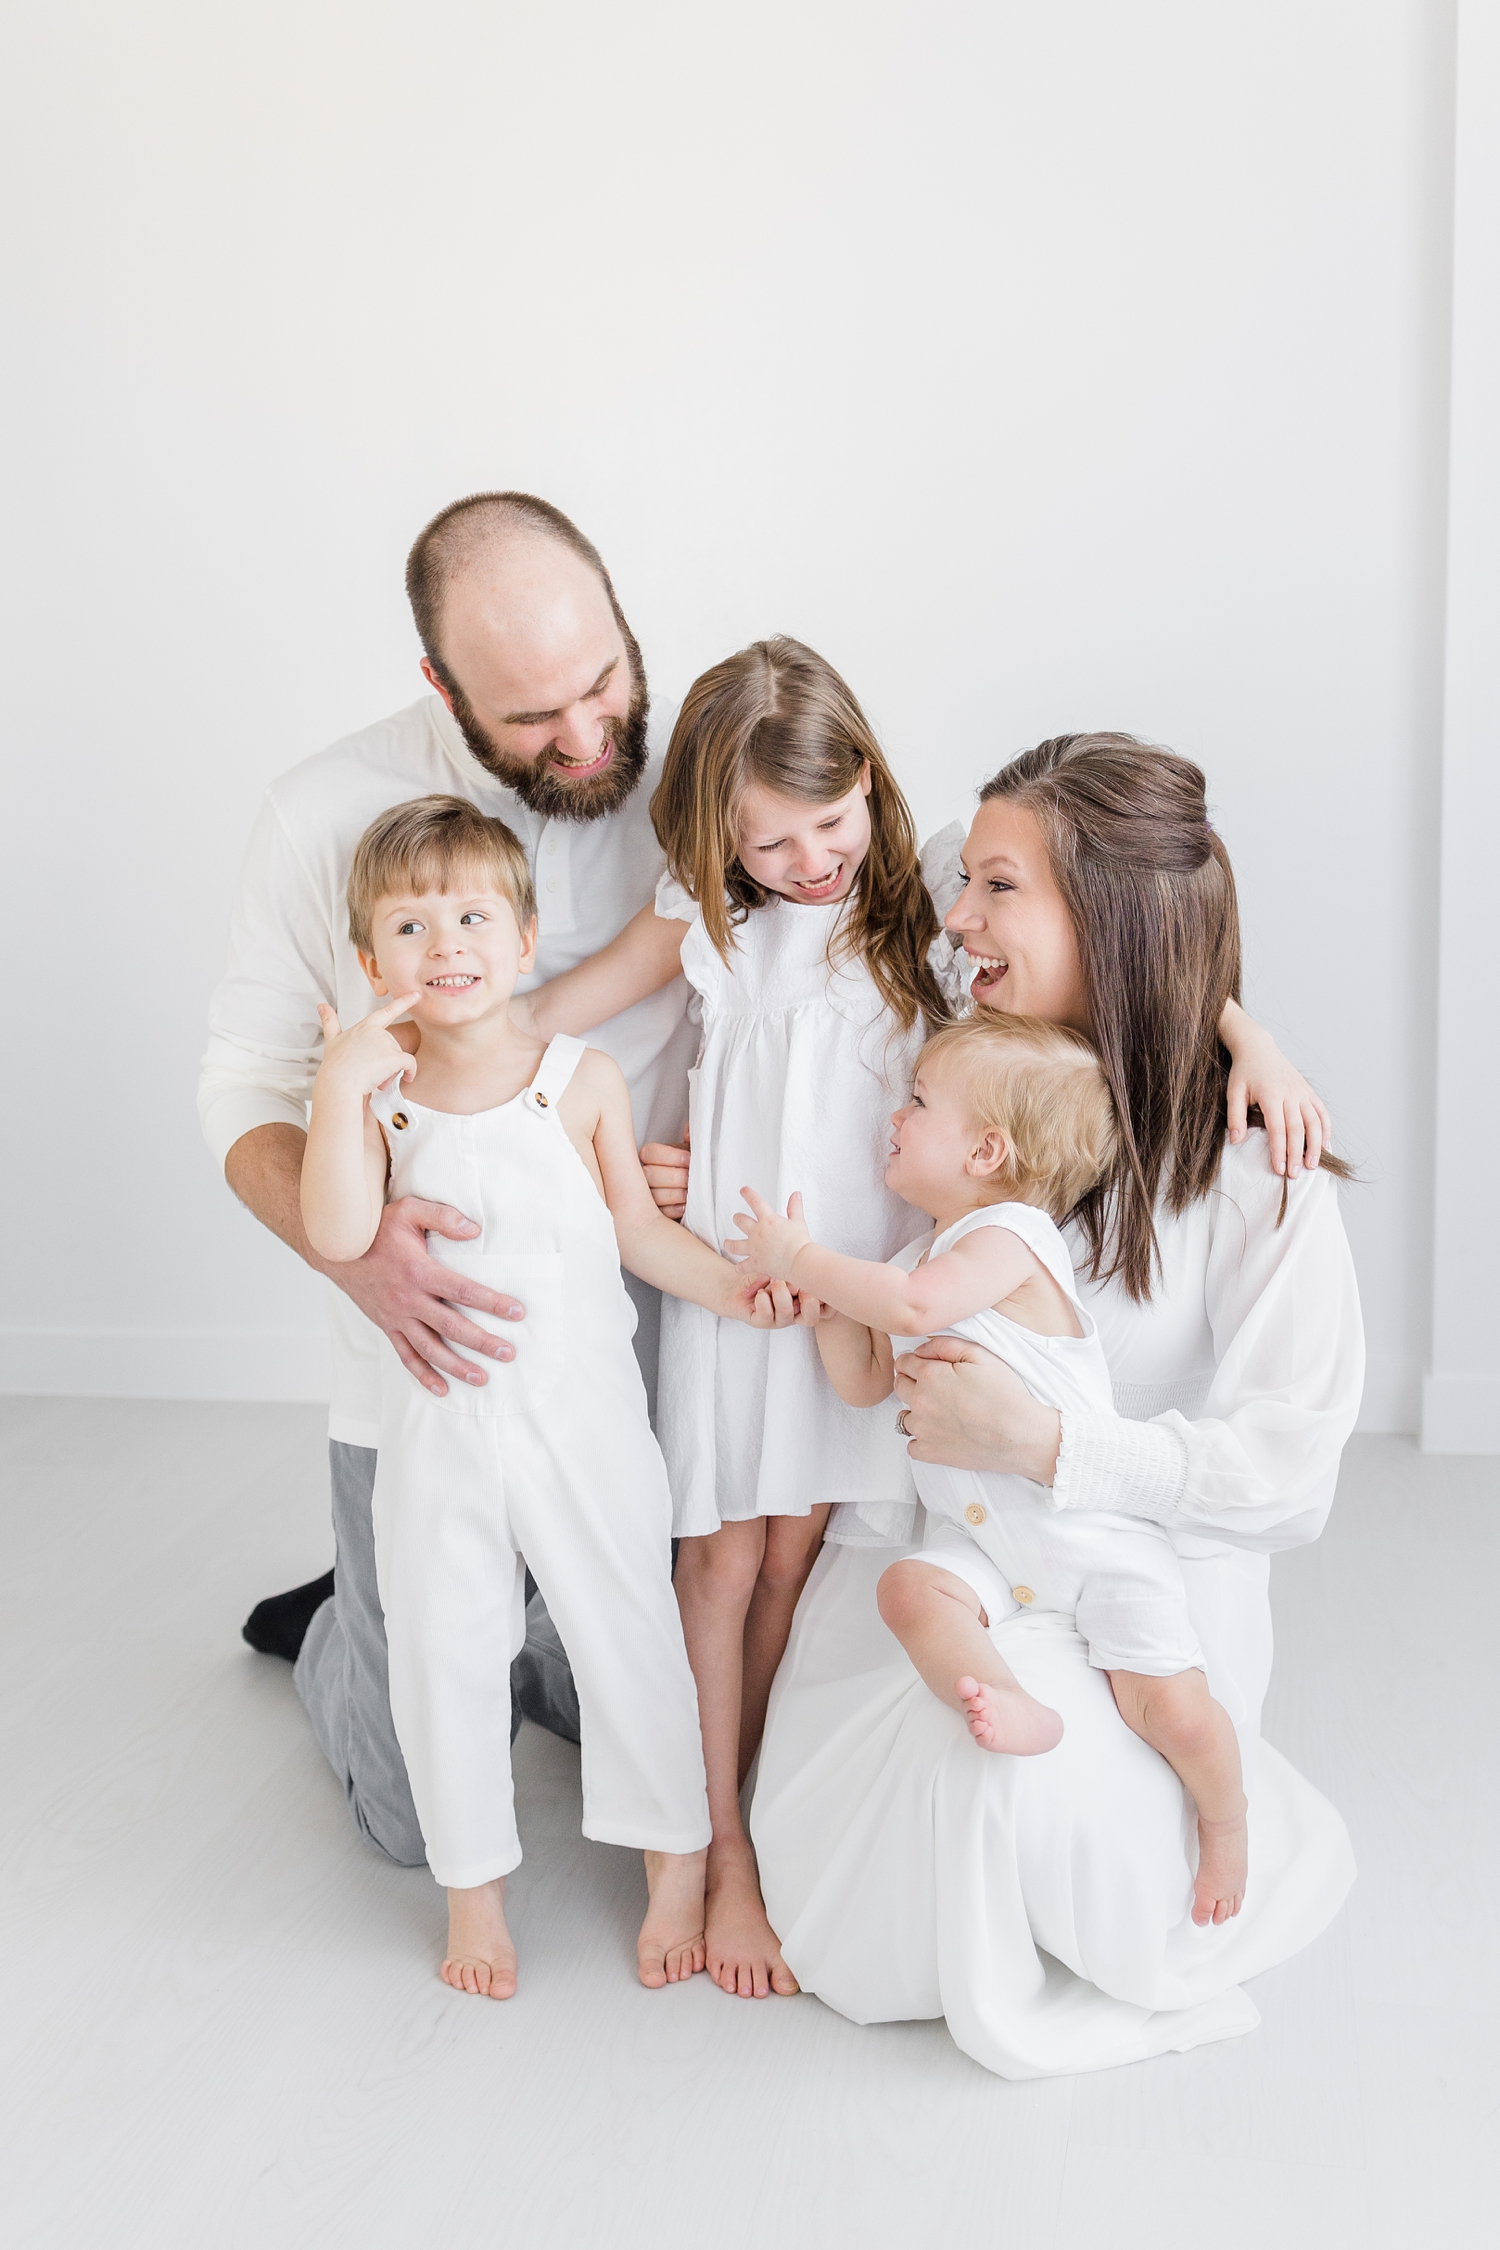 Schreiner family smile at each other during a signature white studio photography session | CB Studio